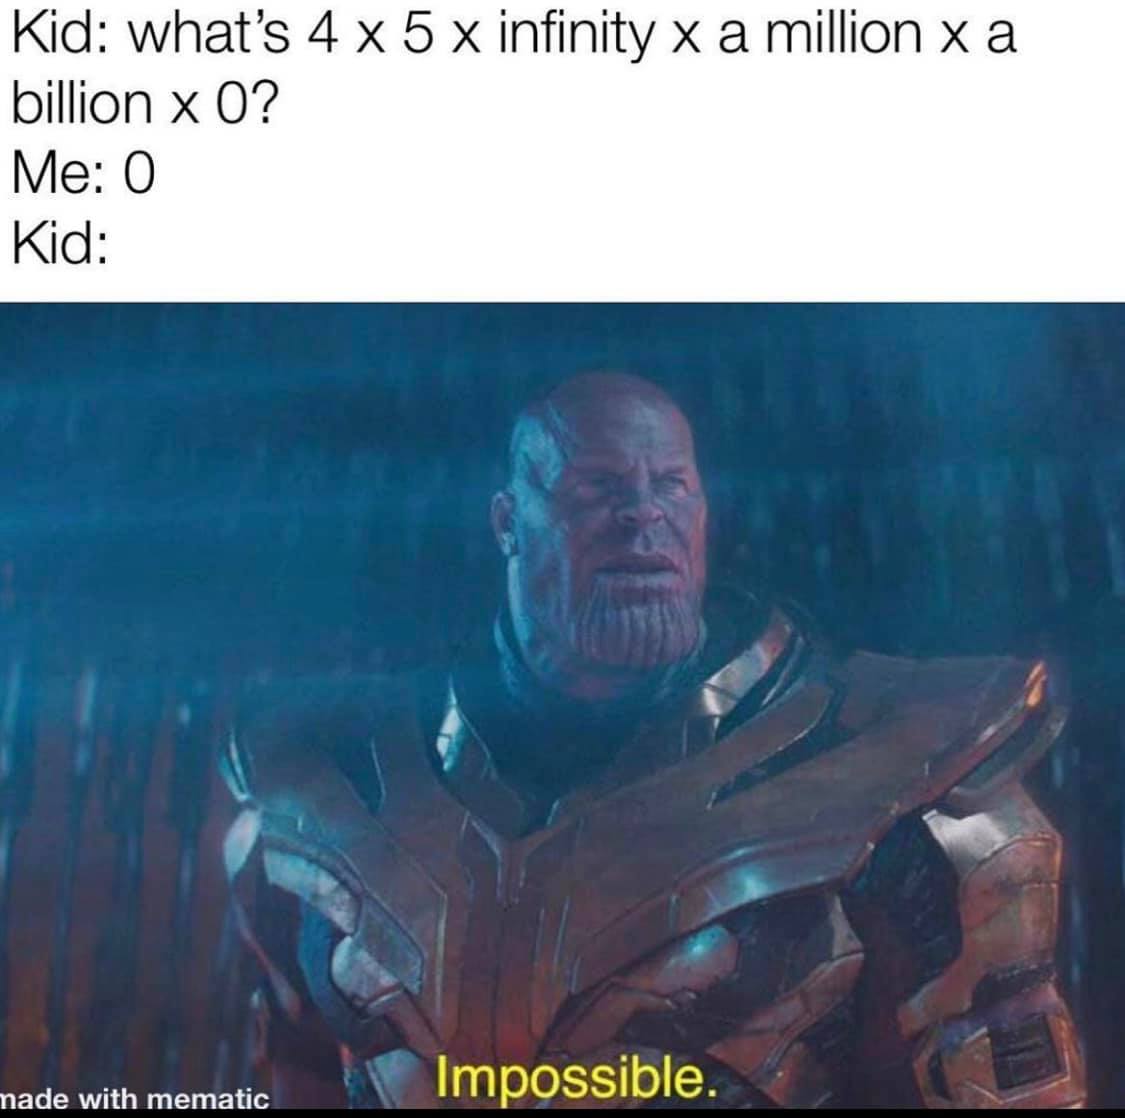 dad memes - thanos impossible meme - Kid what's 4 x 5 x infinity x a million x a billion x 0? Me 0 Kid 111 made with mematic Impossible.